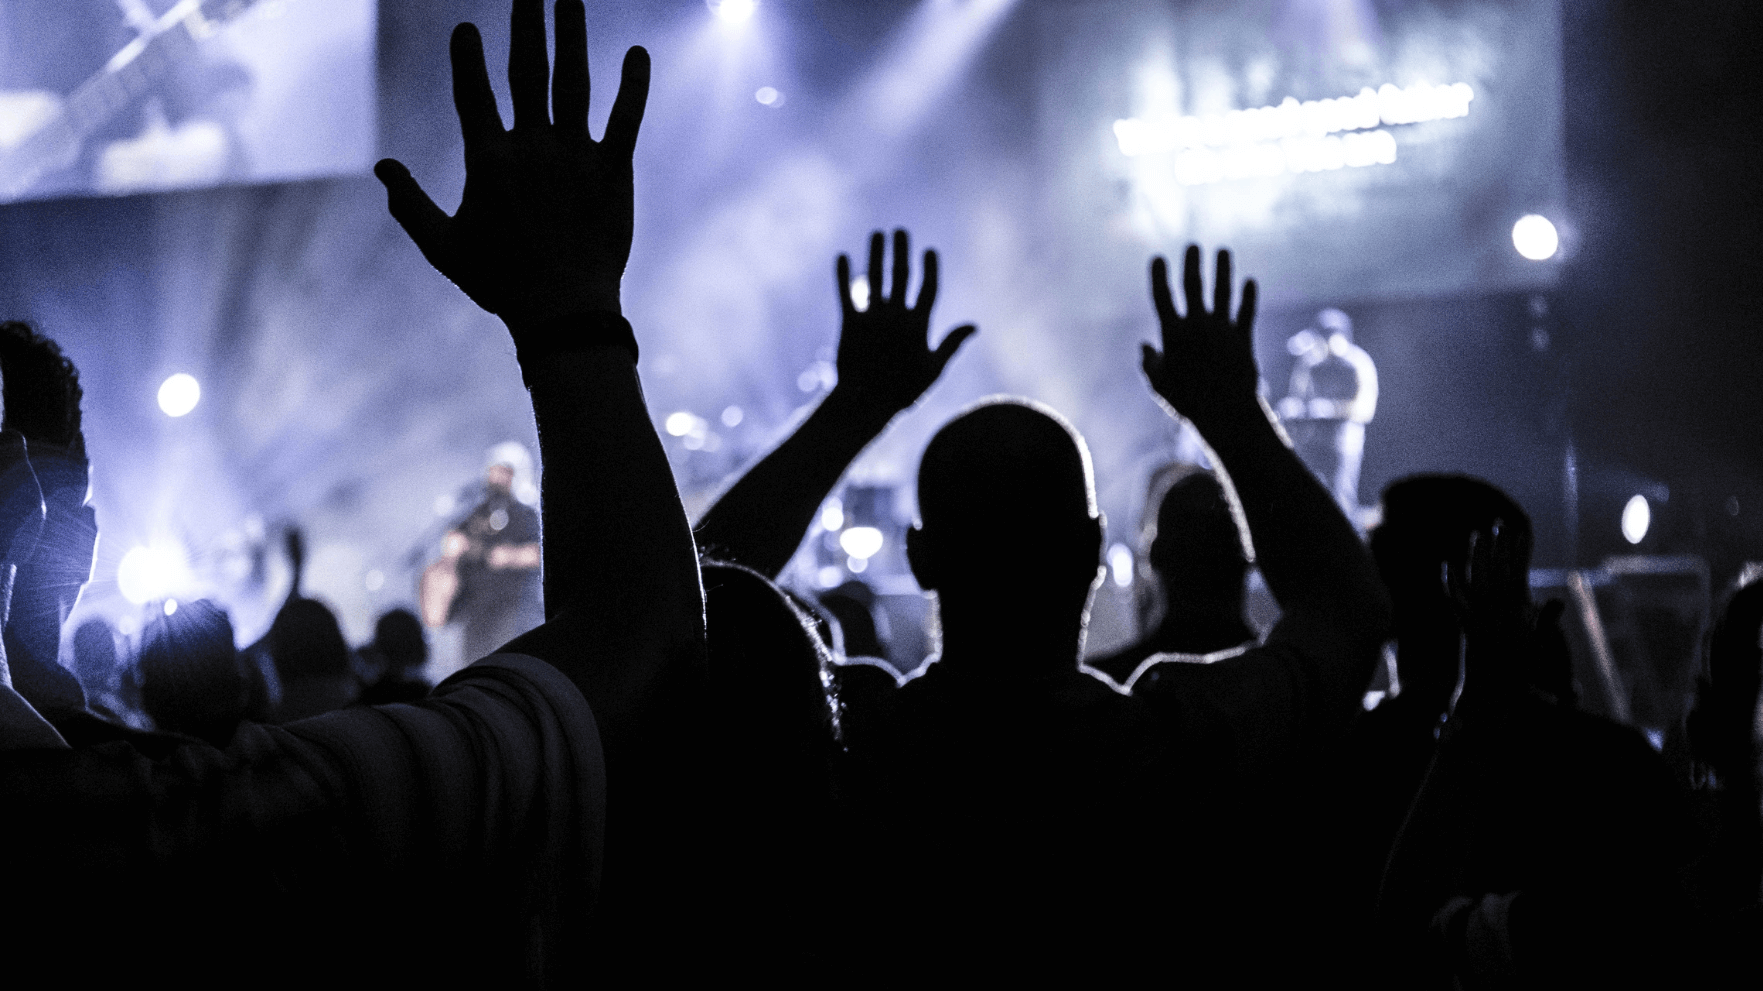 Featured image for “Come to God in worship”